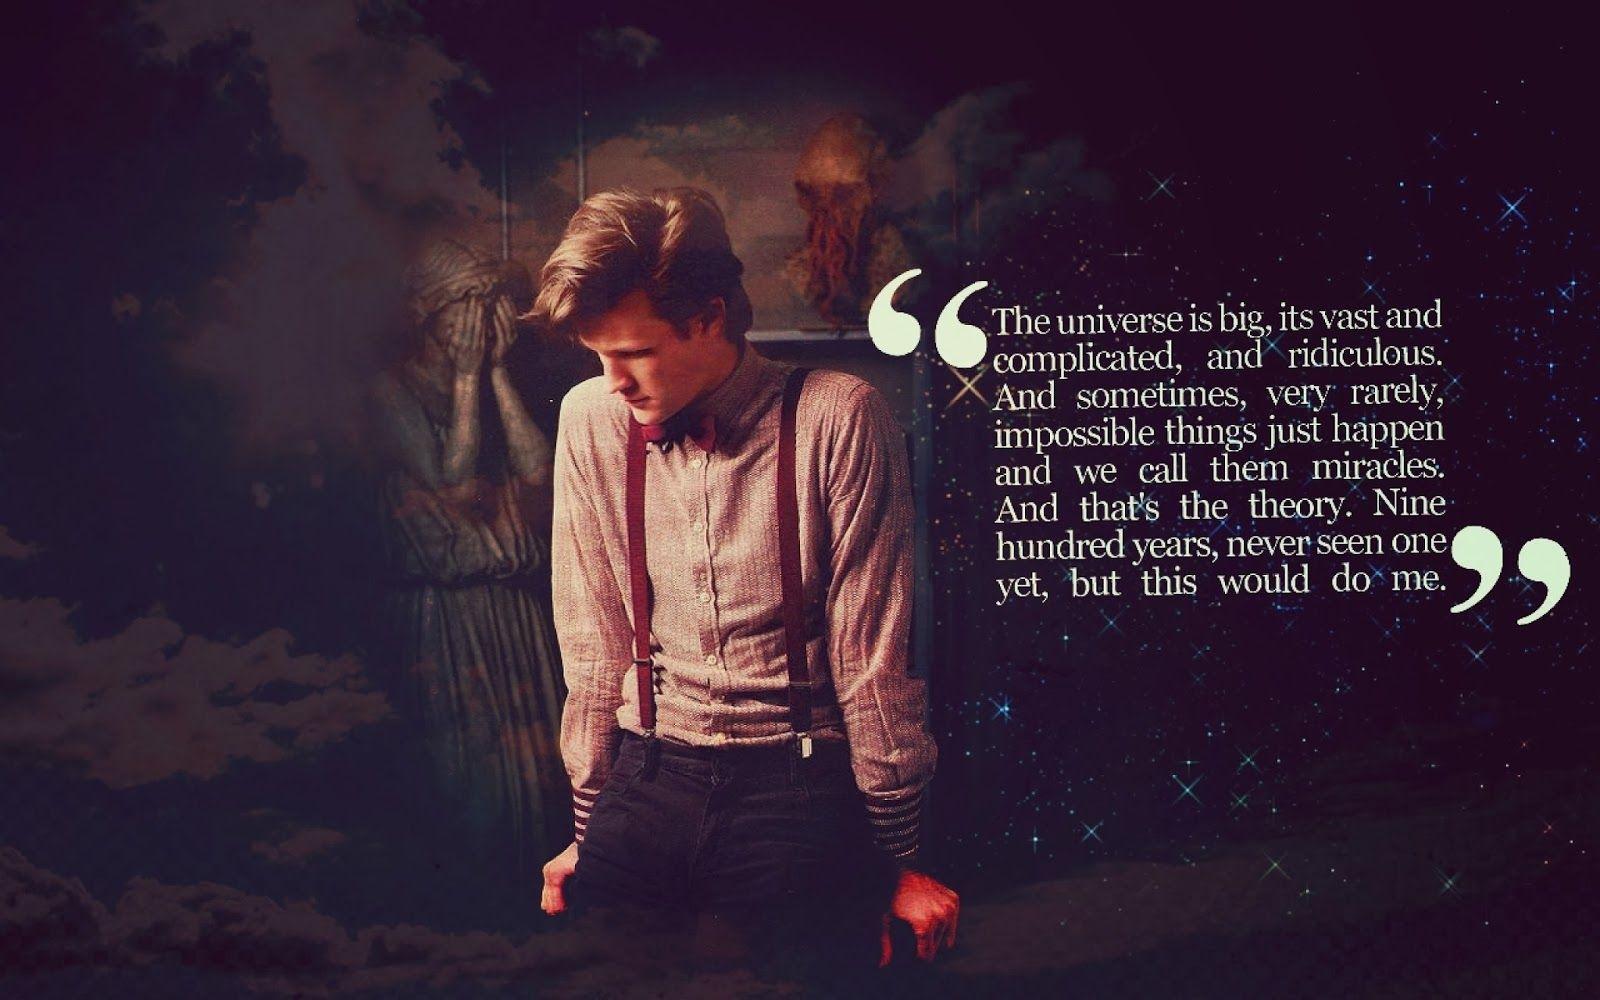 Our 5 favourite #DoctorWho quotes! /1wUQkcd Which one